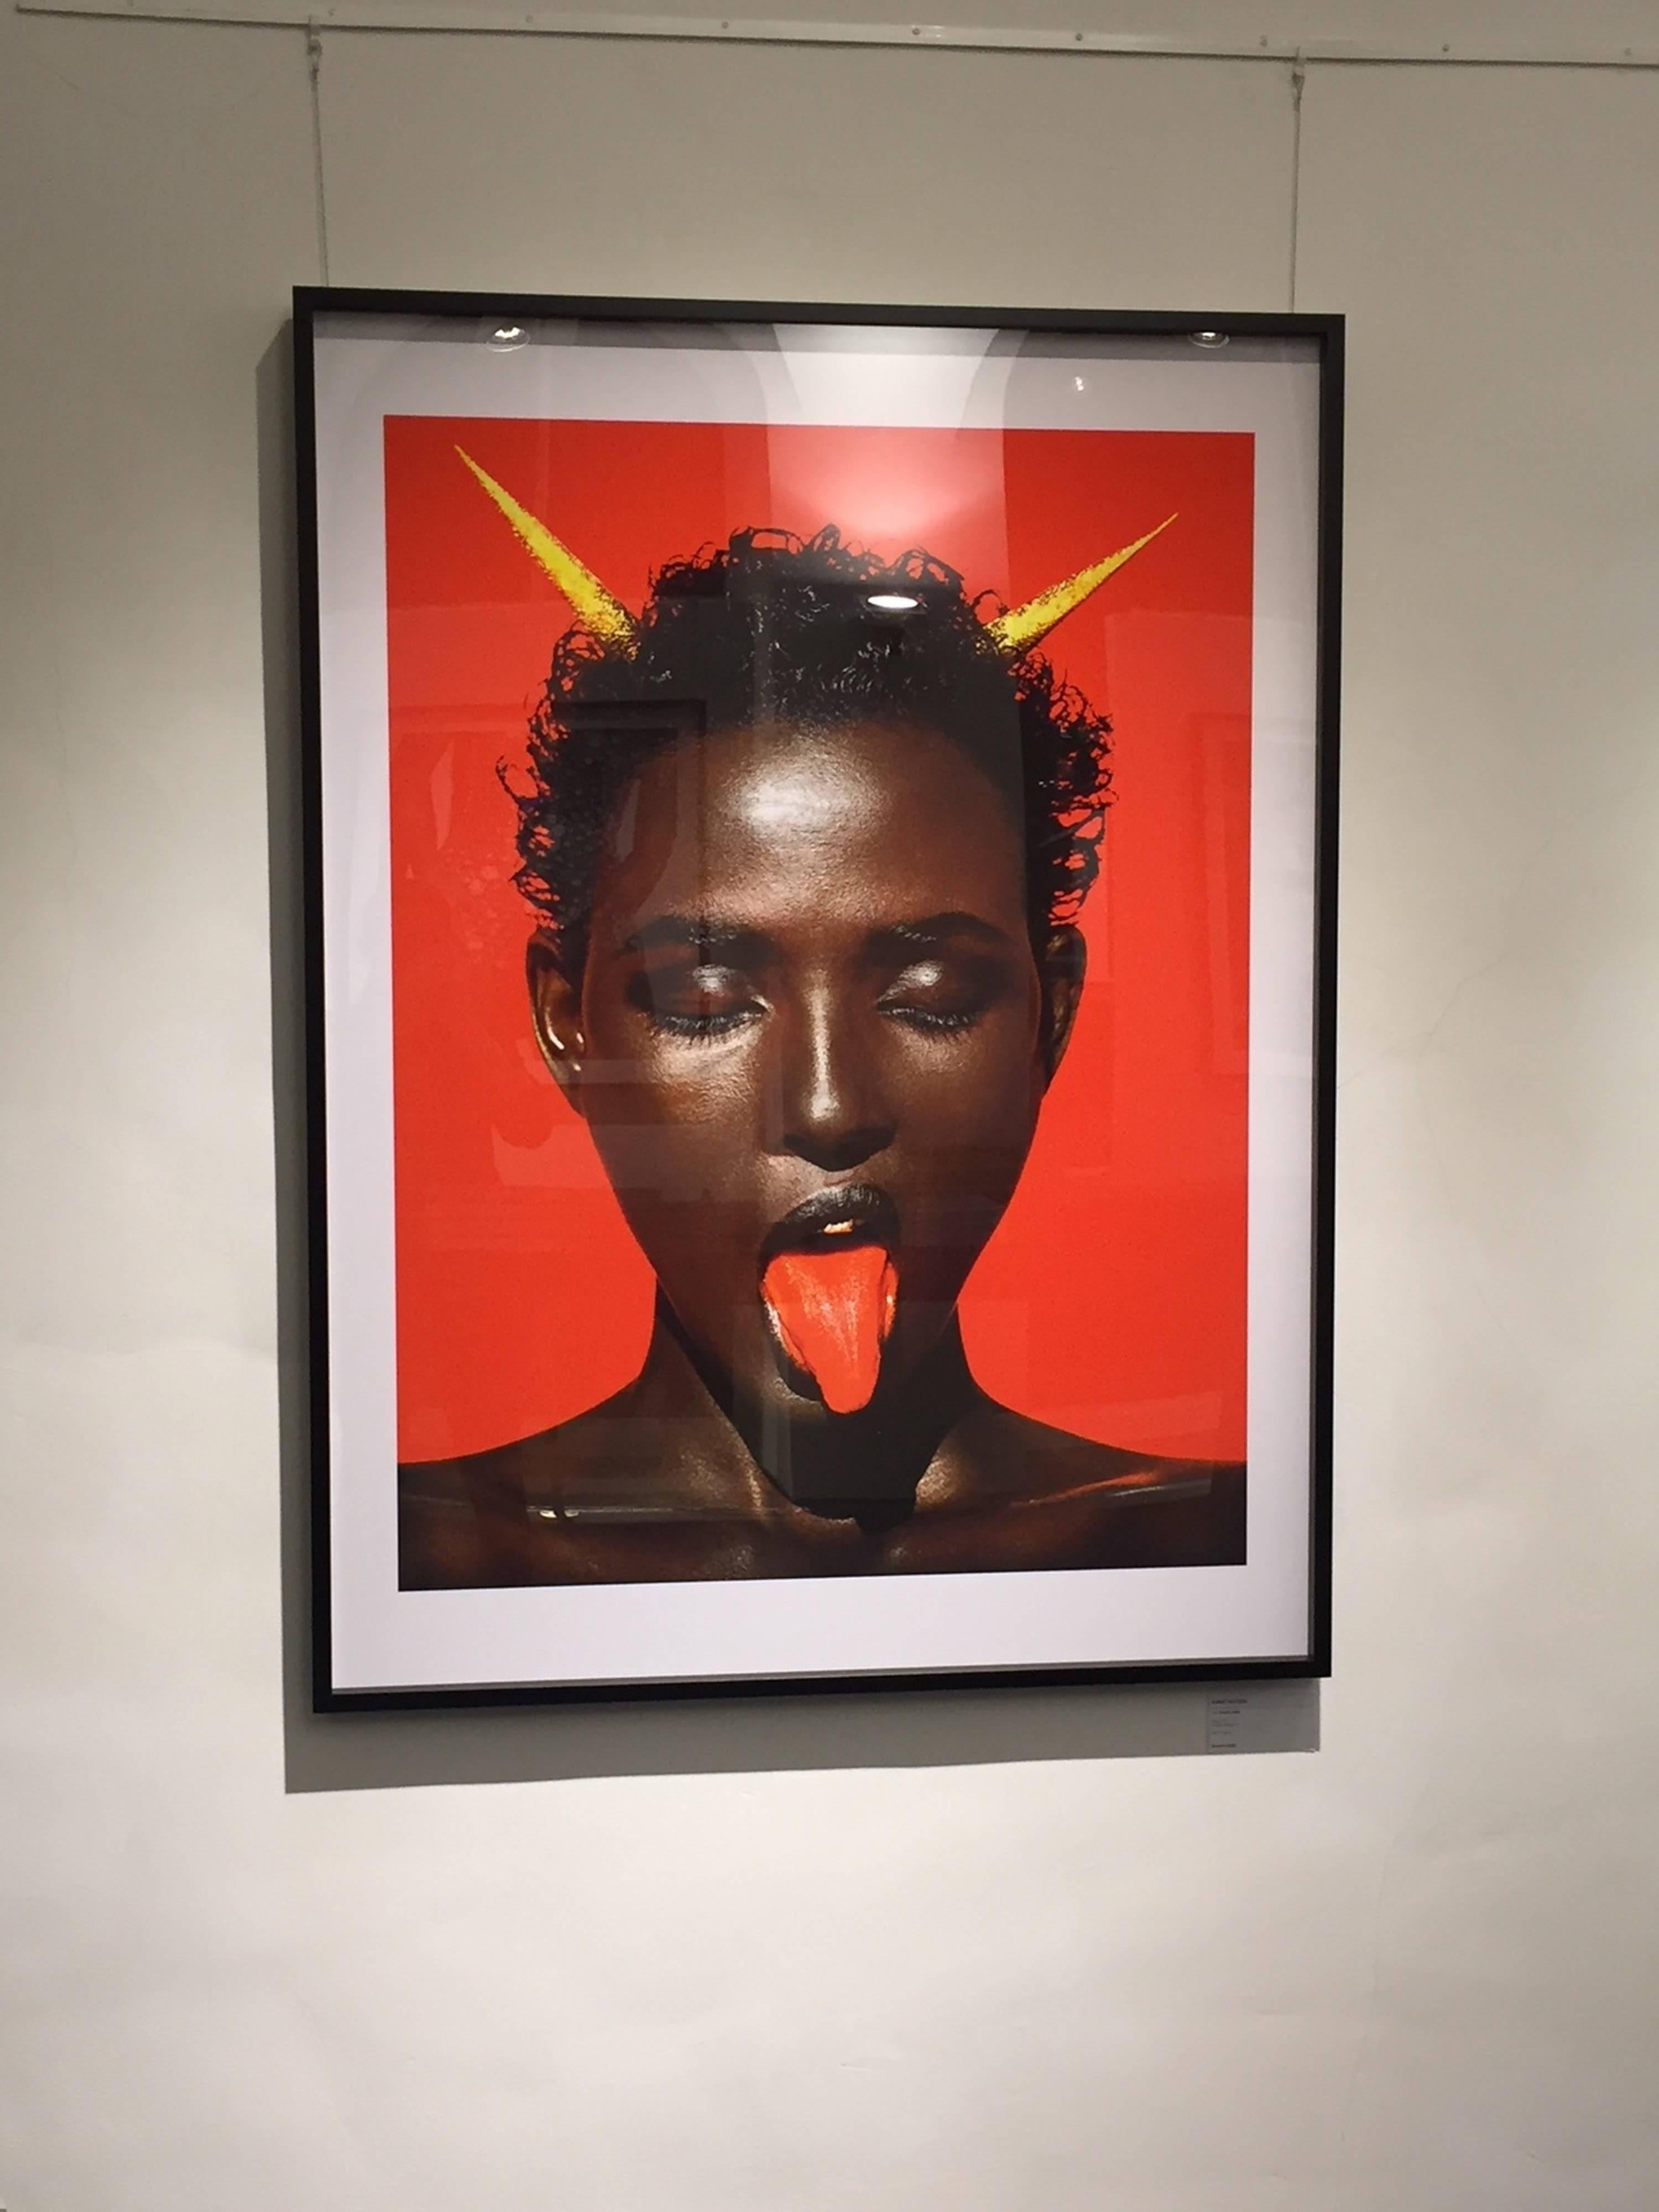 Waris Dirie Marrakech - iconic supermodel with red in the background - Photograph by Albert Watson